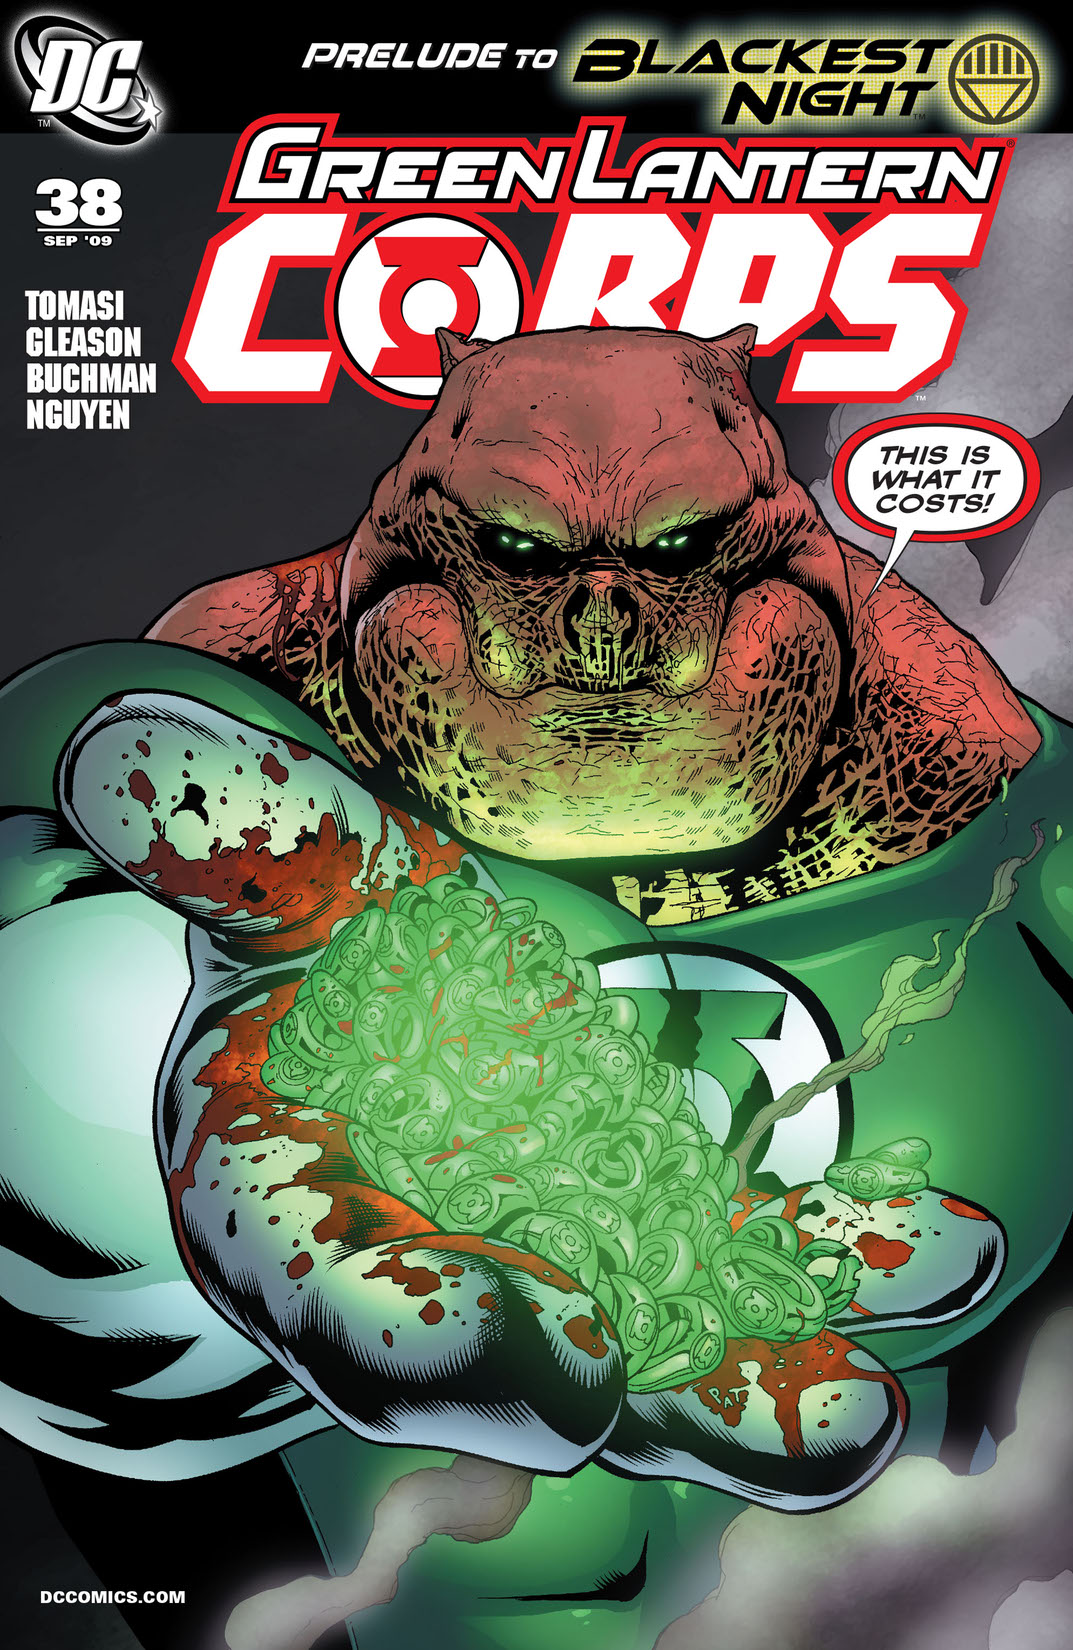 Green Lantern Corps (2006-) #38 preview images